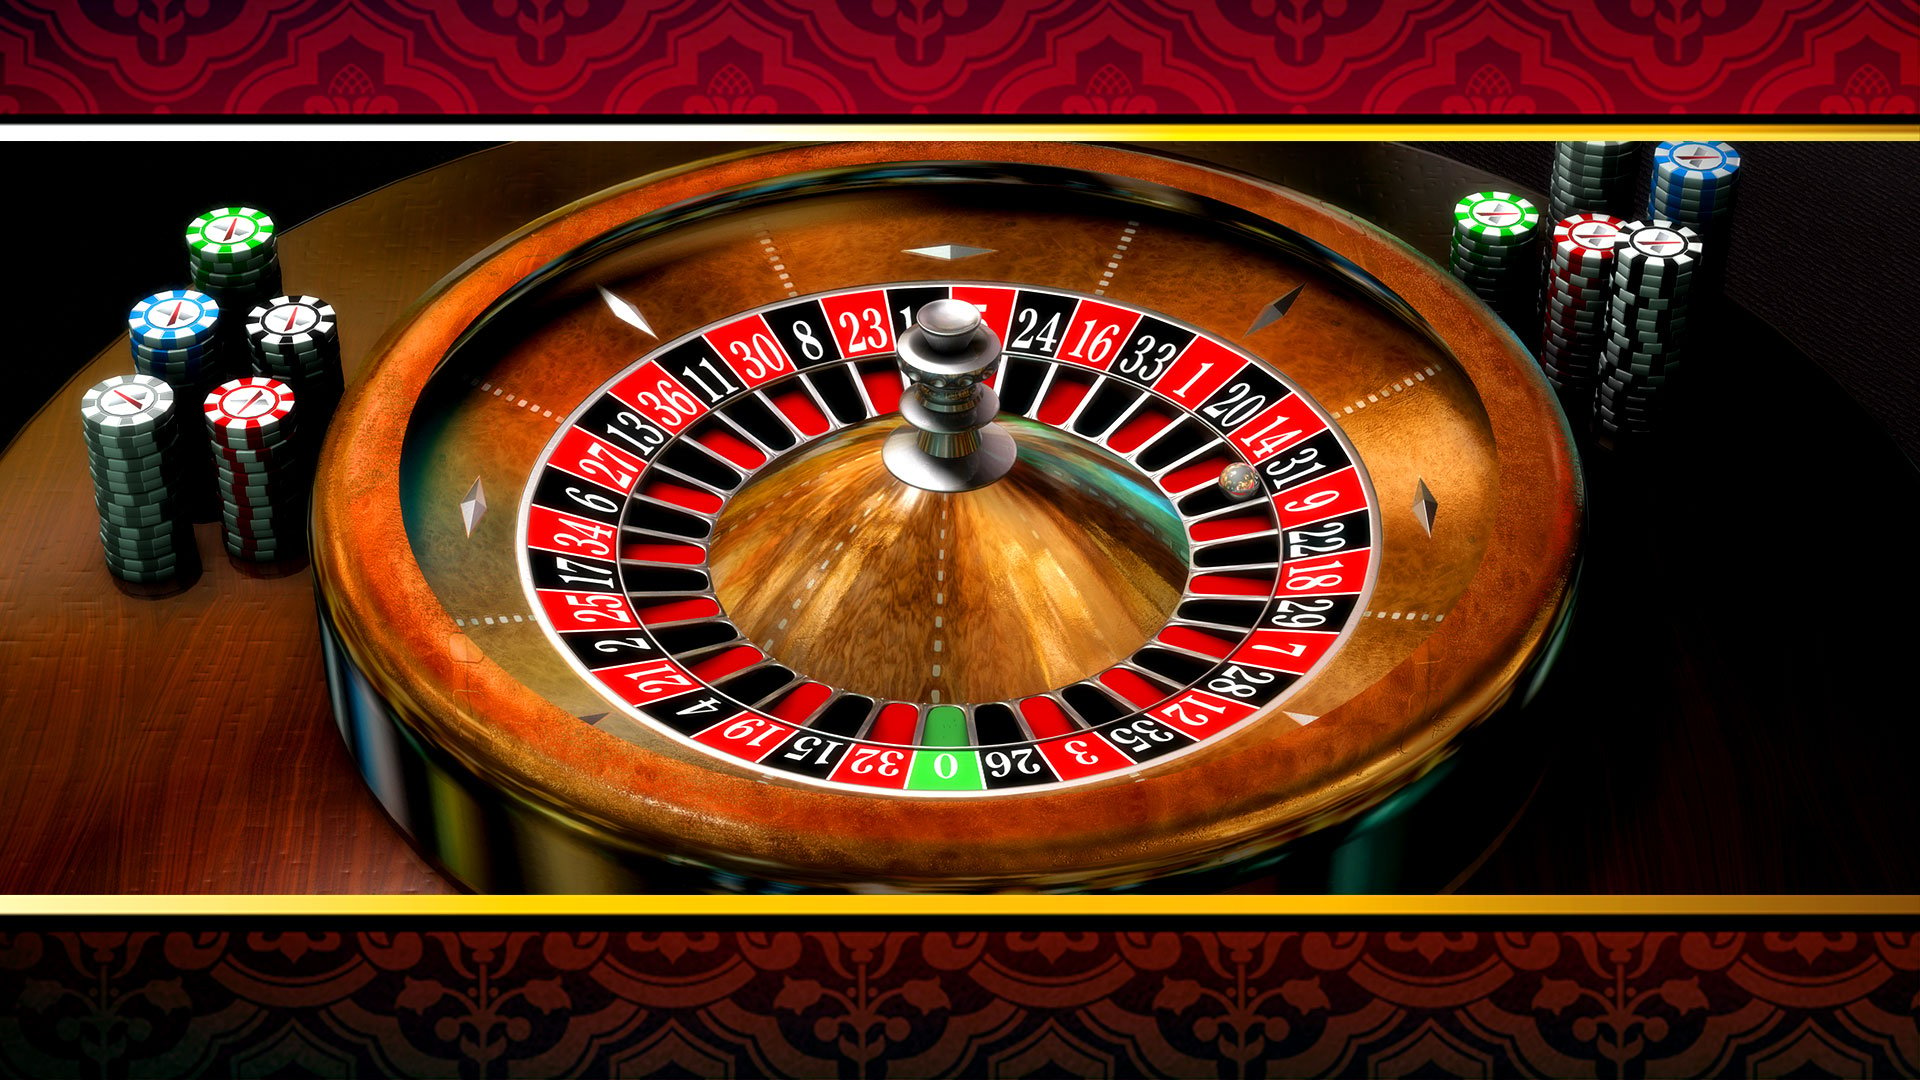 Game hight resolution background Roulette Master